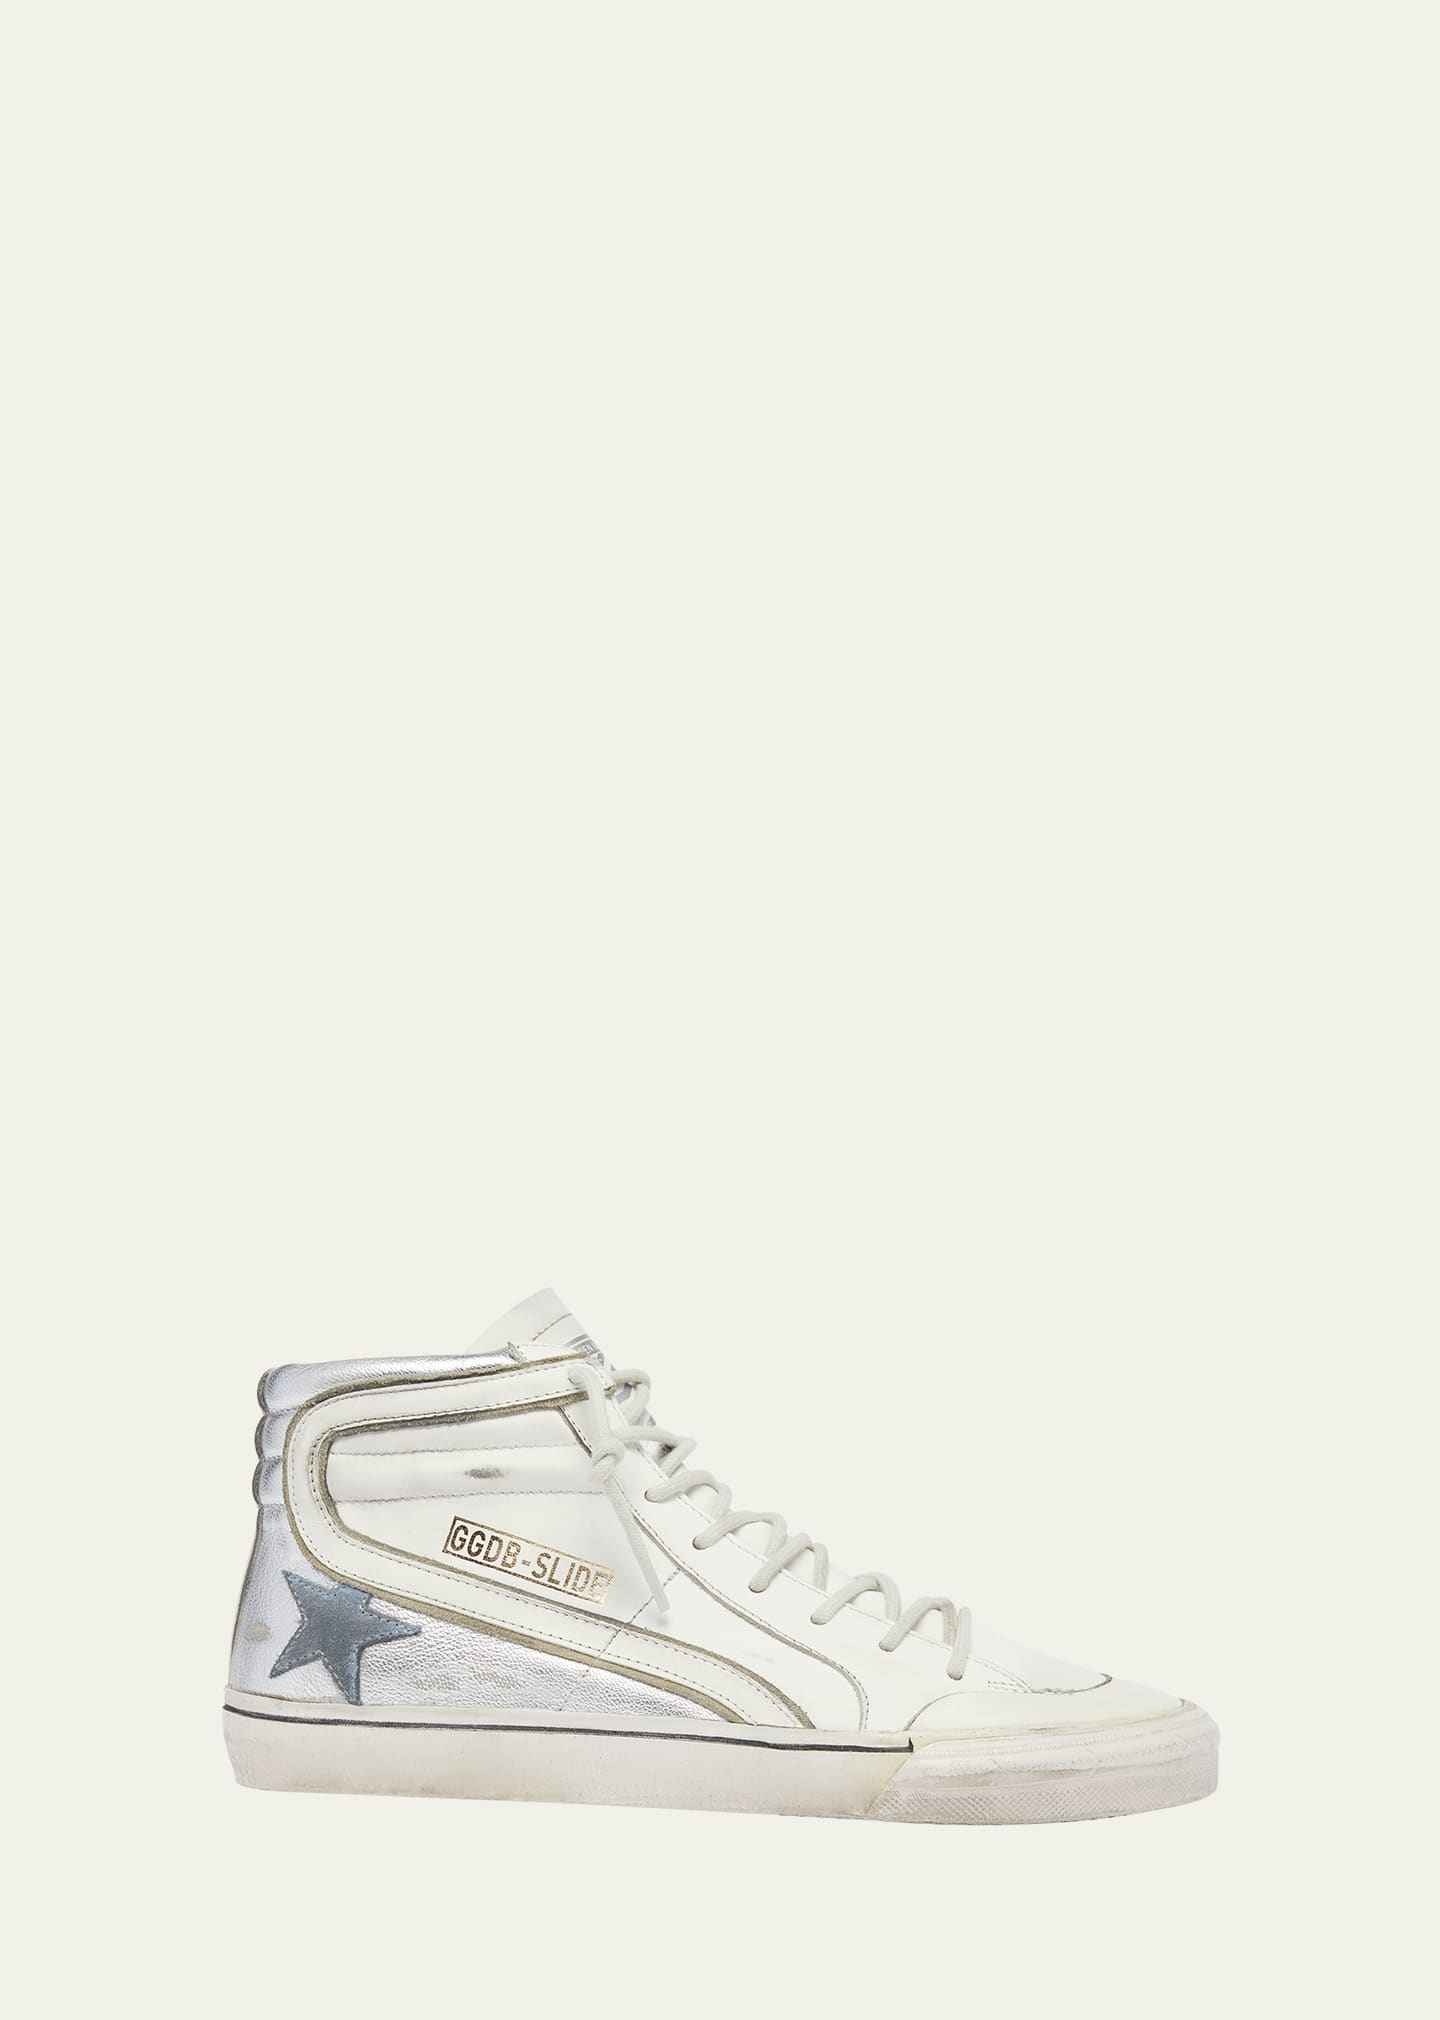 Shop Golden Goose Slide Mid-top Mixed Leather Sneakers In White Silver Ligh